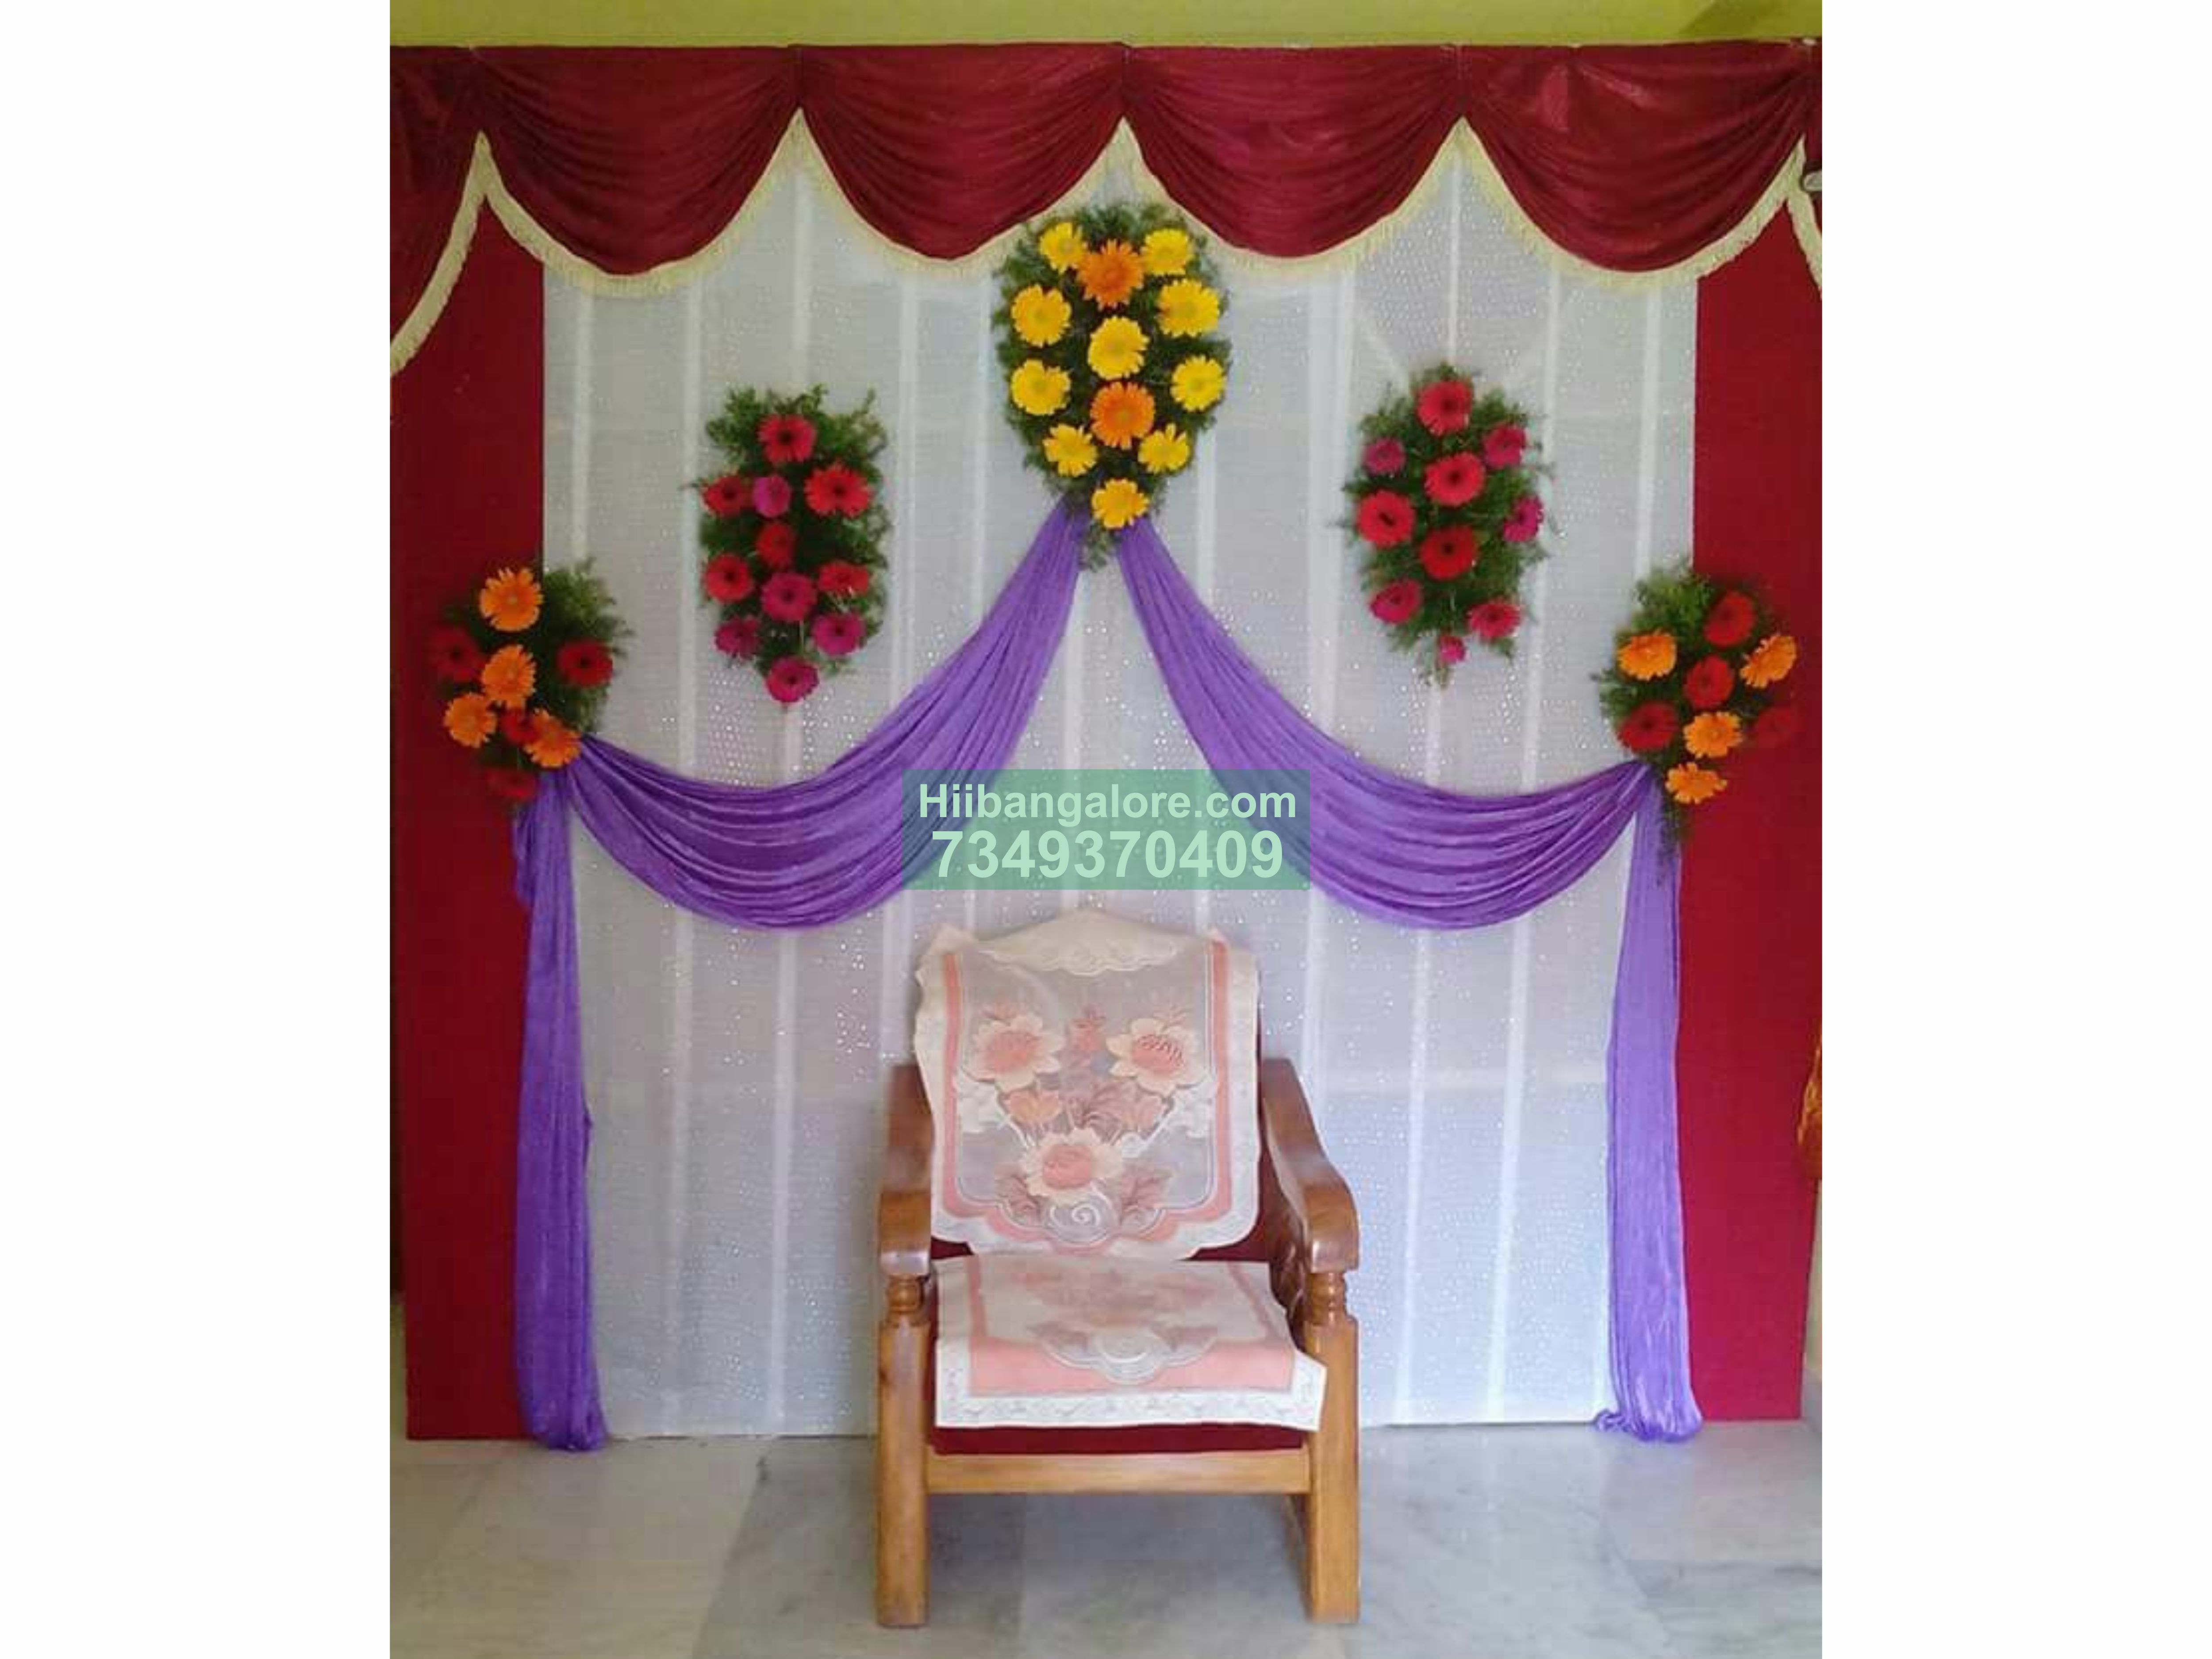 Engagement decorations bangalore - Best Birthday Party Organisers